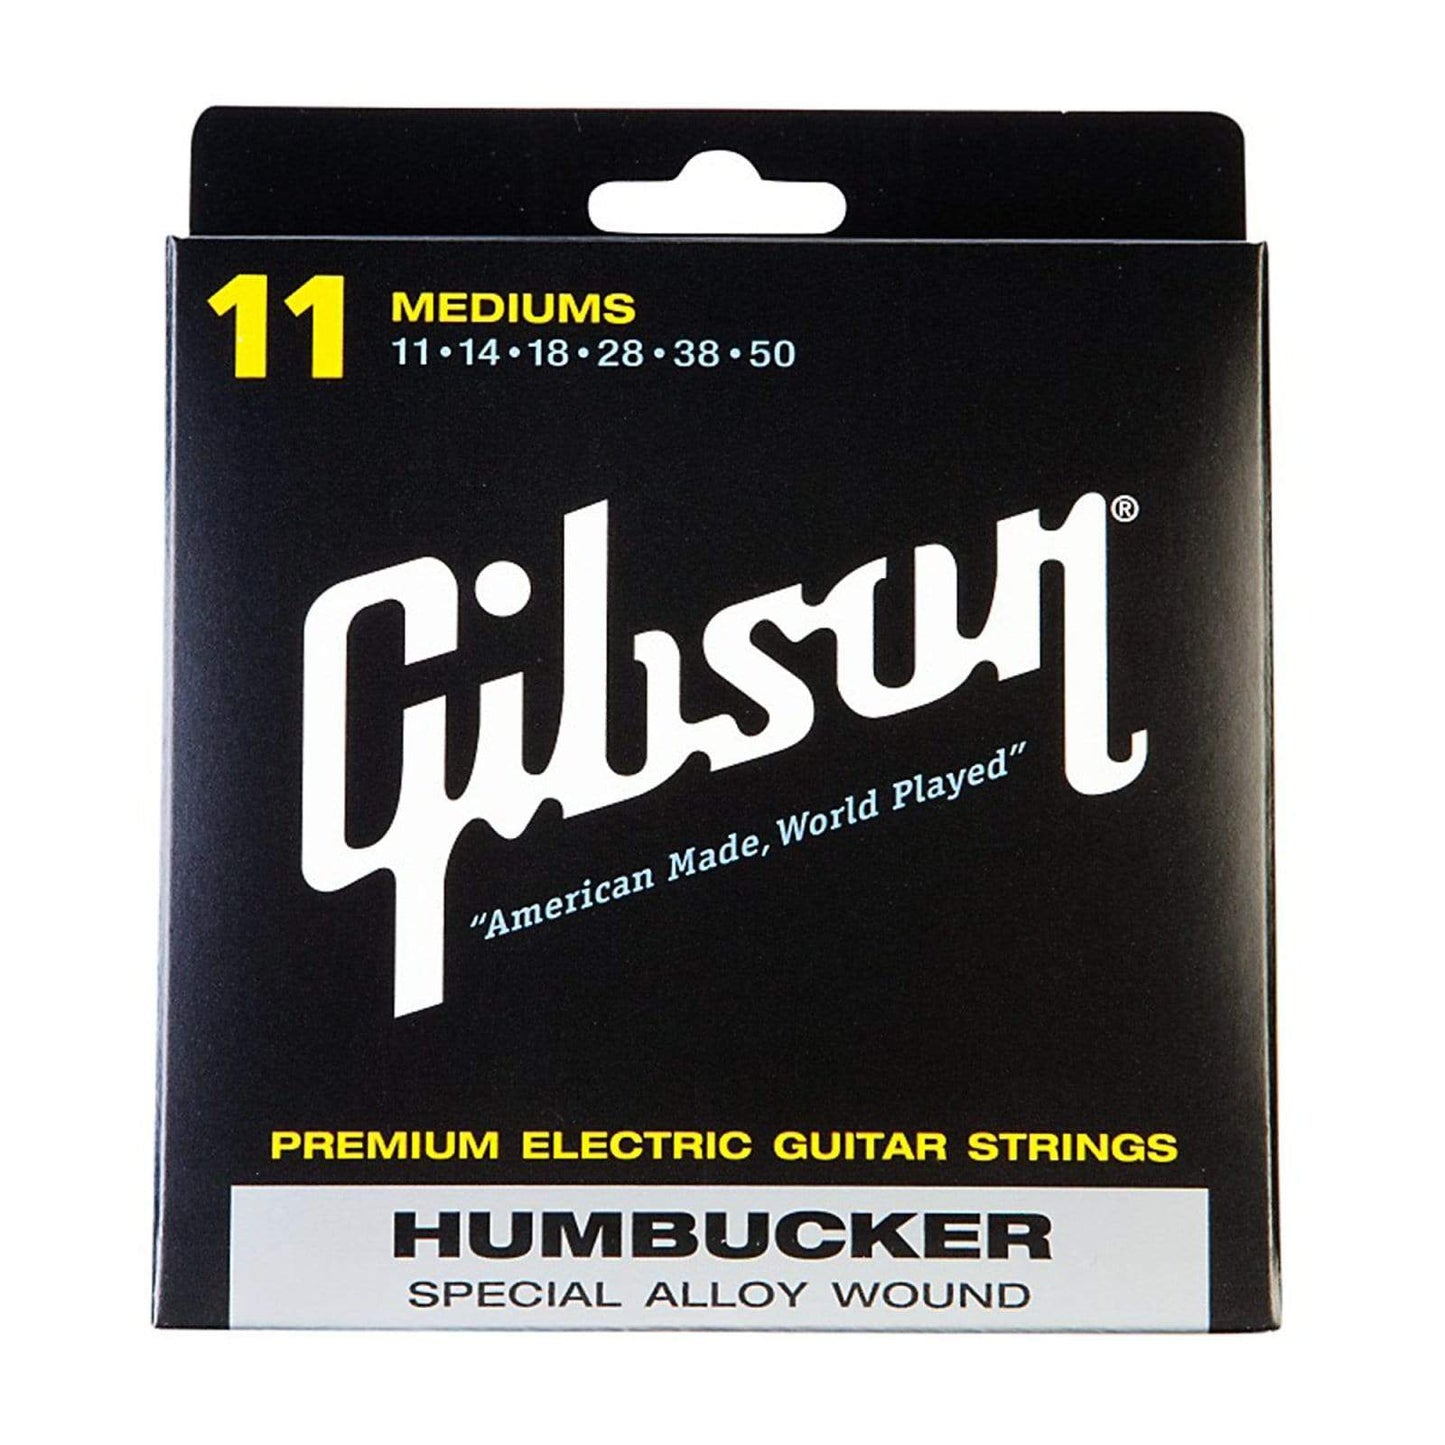 Gibson Humbucker Special Alloy Wound Electric Guitar Strings 11-50 Accessories / Strings / Guitar Strings